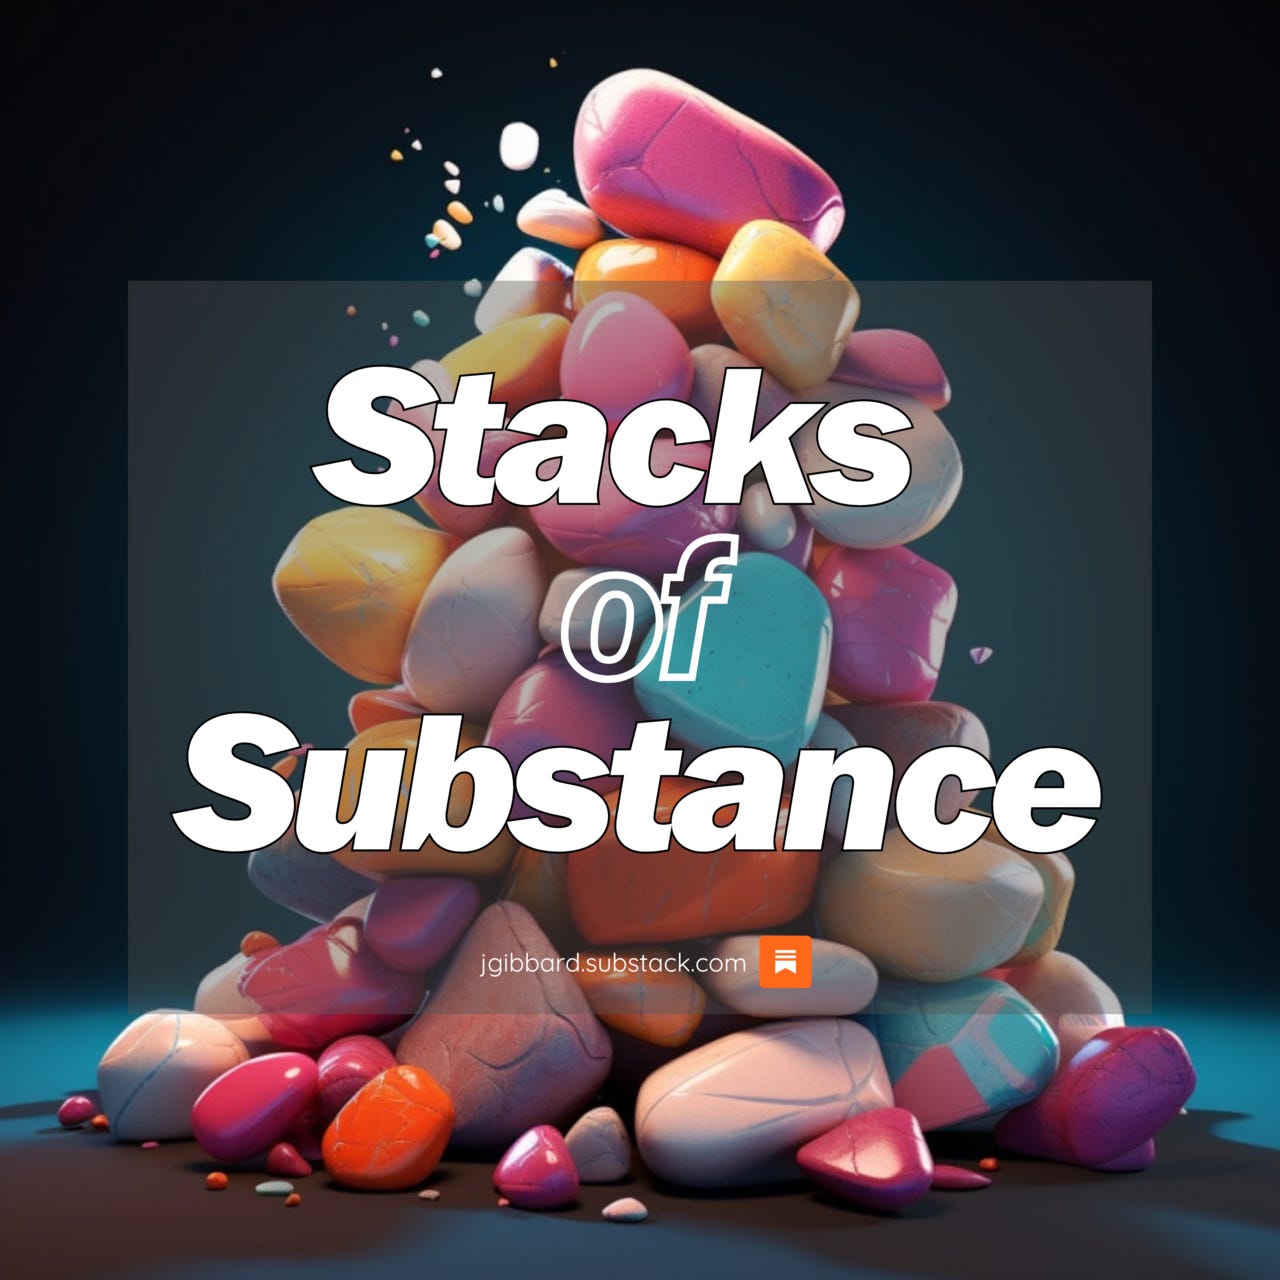 Stacks of Substance